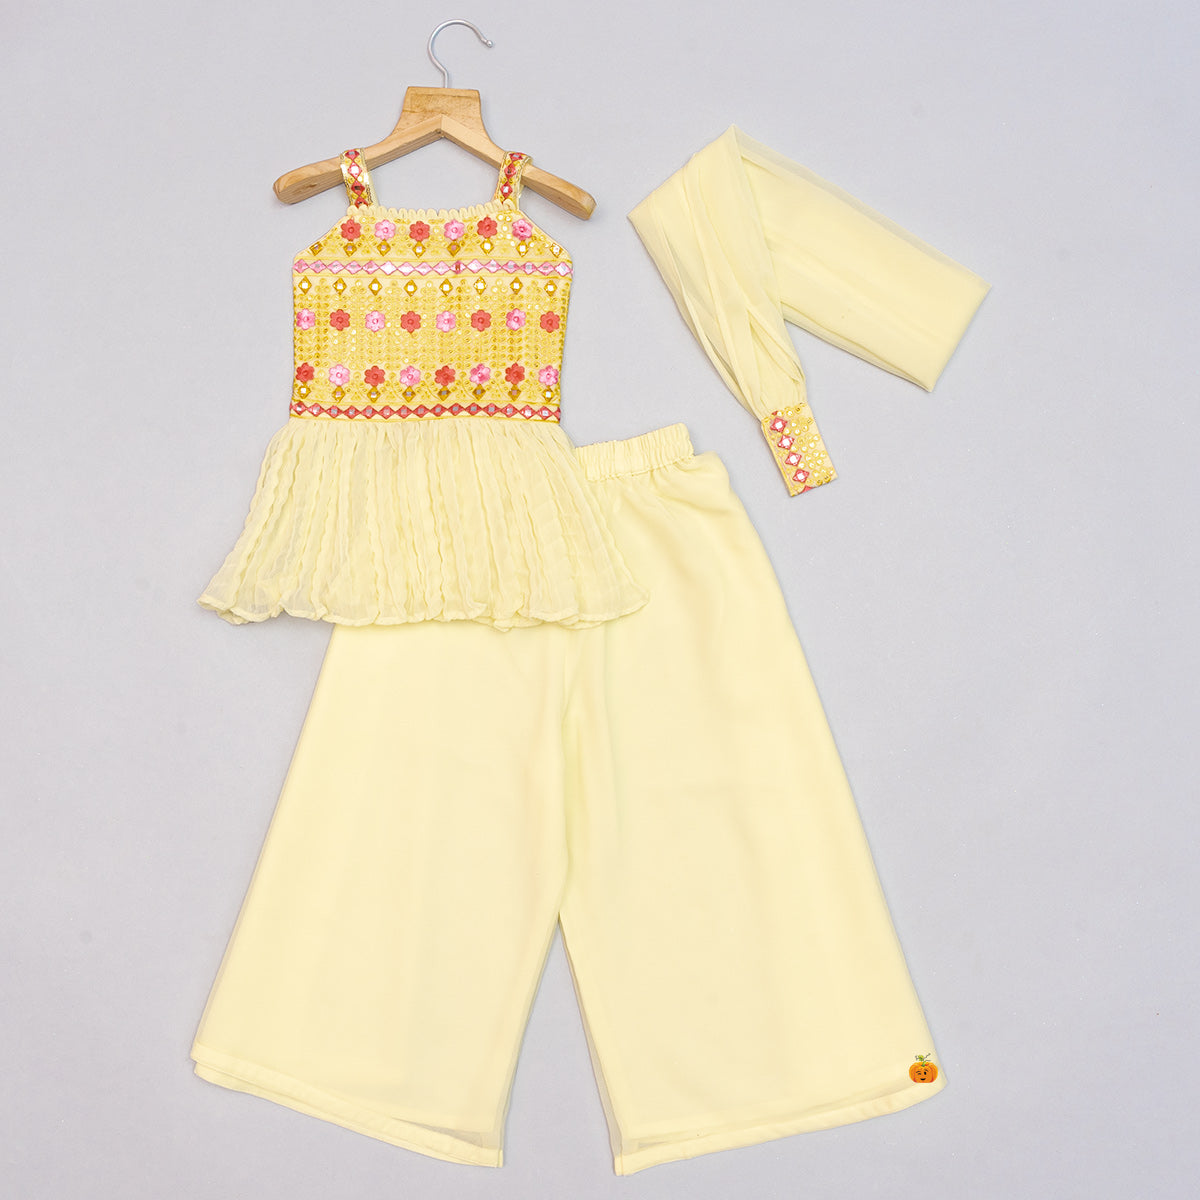 Buy Full Sets Ethnic Wear Girls Pure Cotton Printed Top Harem pant Indo  Western Clothing Set -Yellow Clothing for Girl Jollee